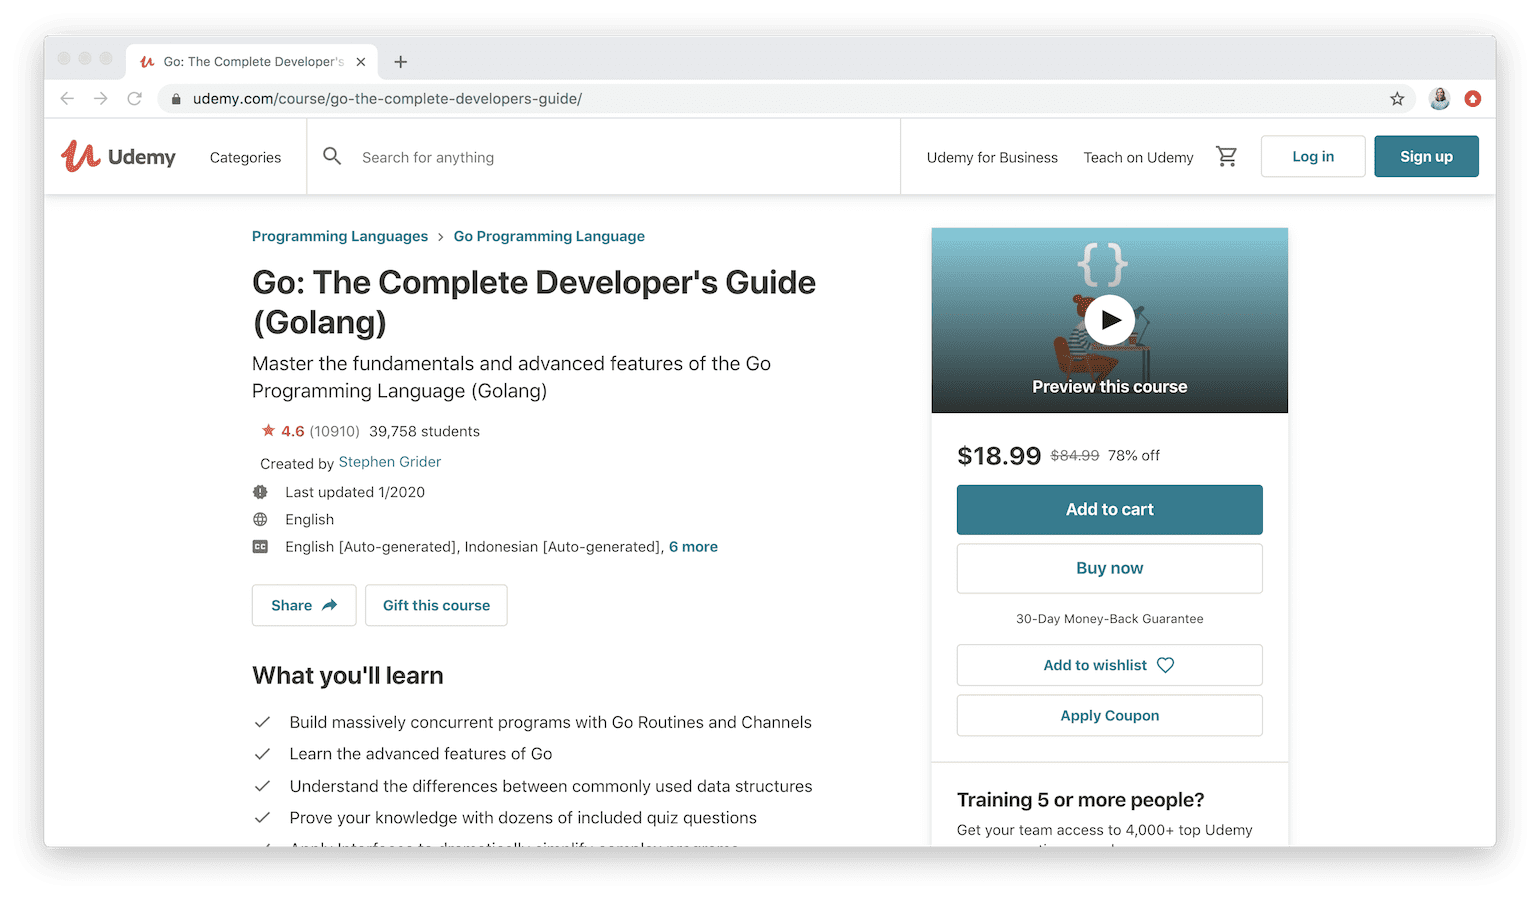 Go: The Complete Developer’s Guide (Golang) on Udemy